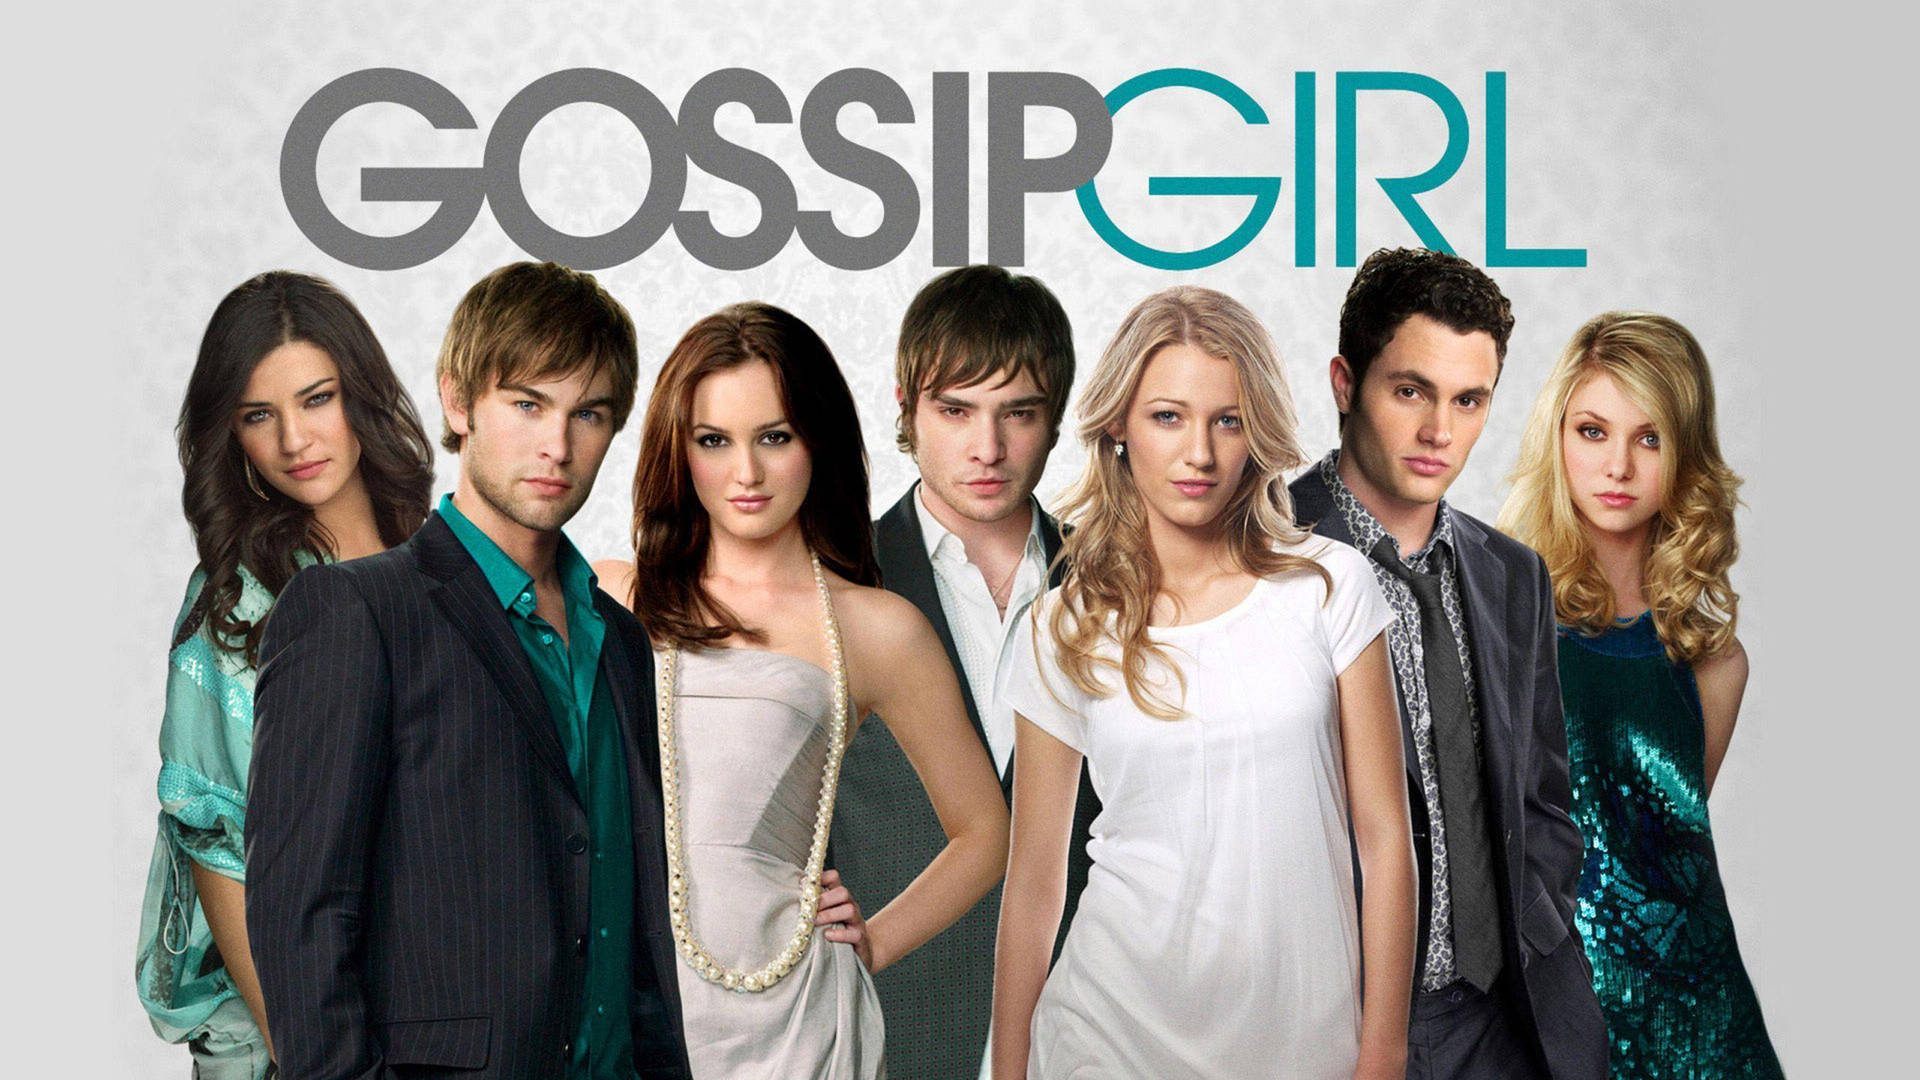 Gossip Girl - Frequently Asked Questions (FAQs)